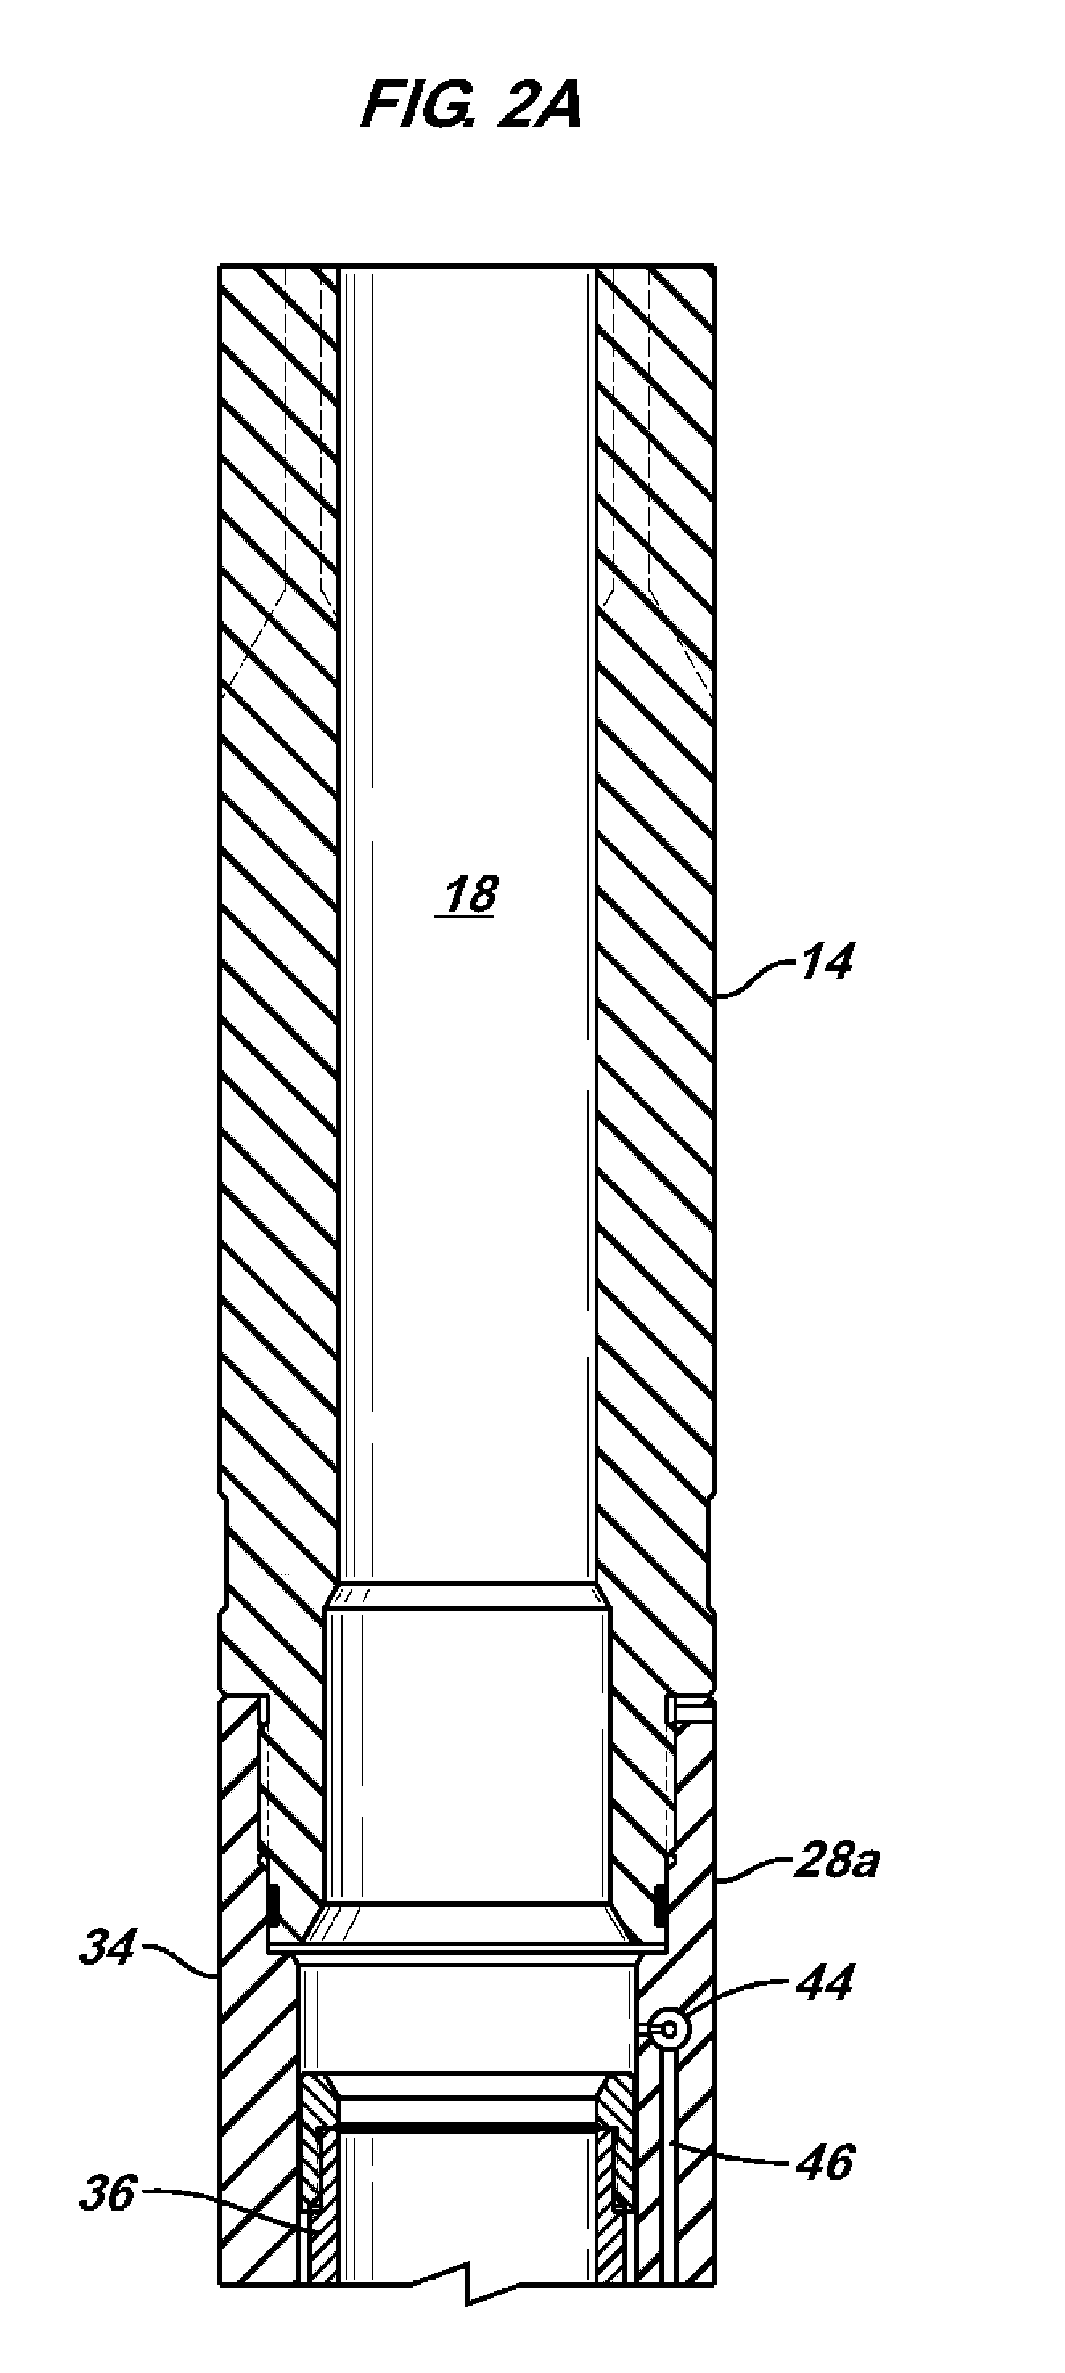 Multiple Interventionless Actuated Downhole Valve and Method